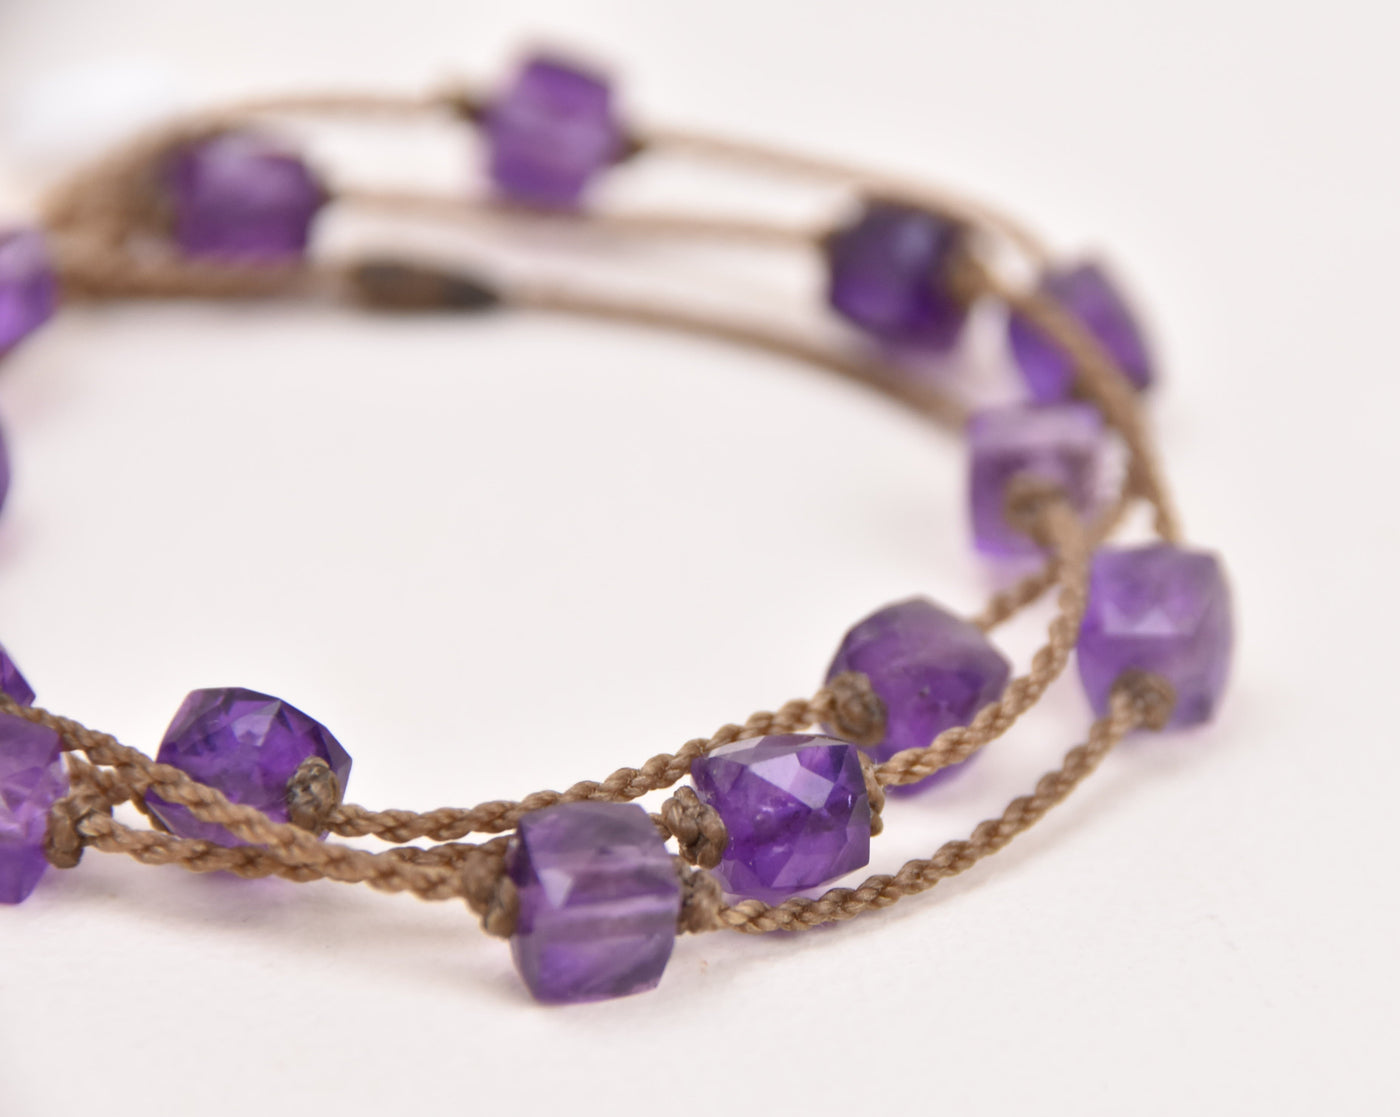 Amethyst Cube Petite - Wrap Only 3 available!